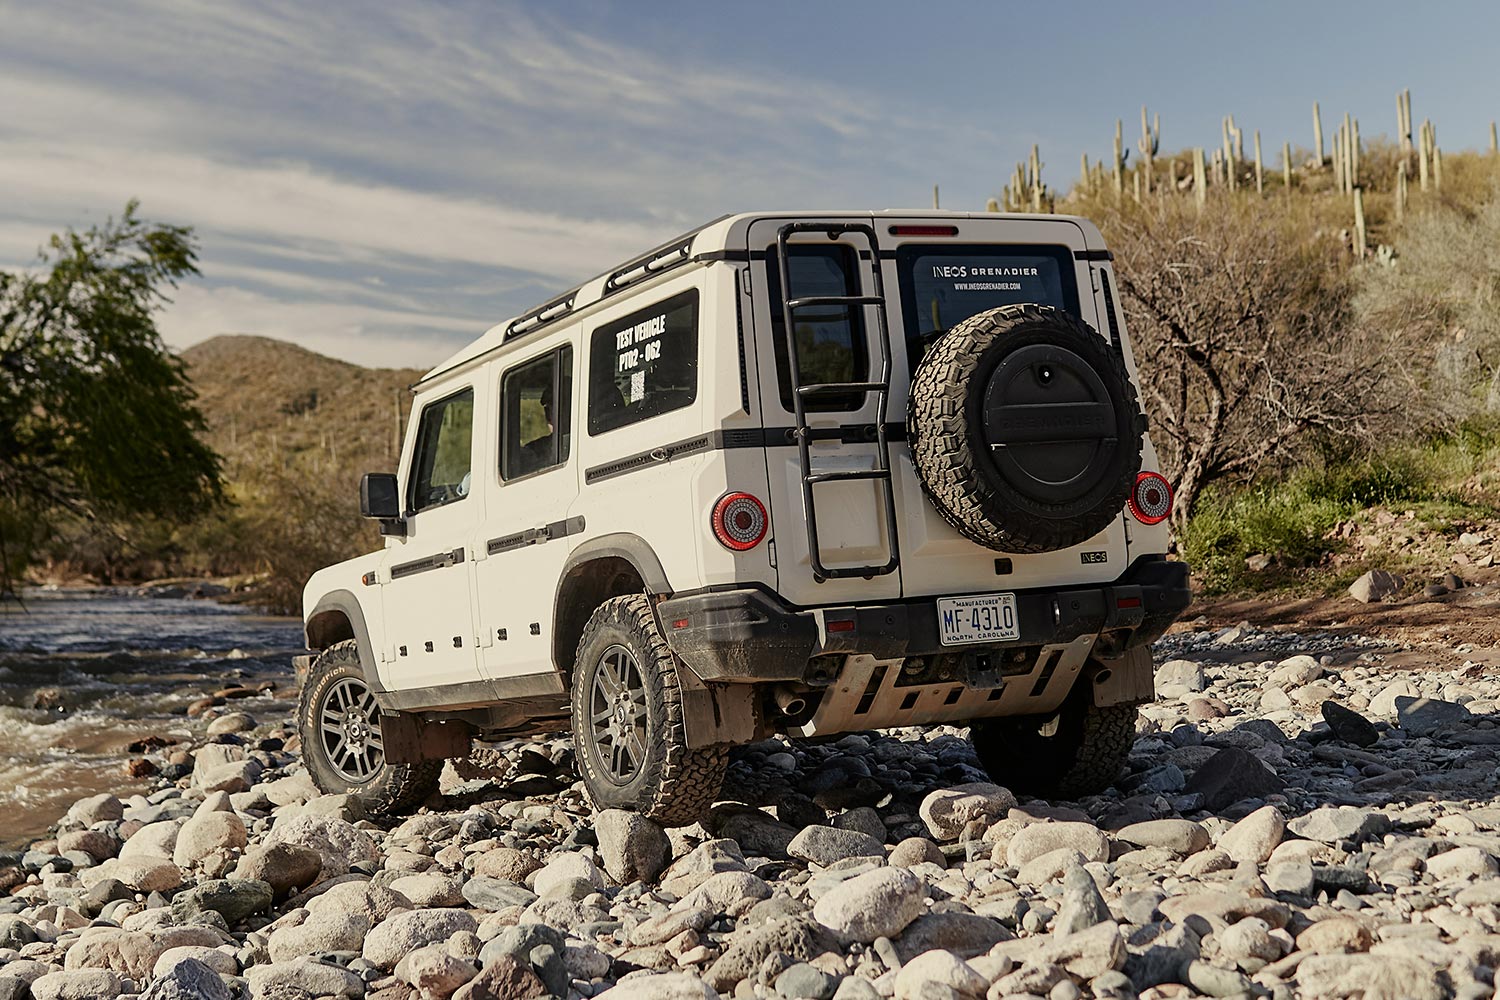 The Ineos Grenadier, an off-road SUV that mimics the old-school Land Rover Defender, driving in the U.S.